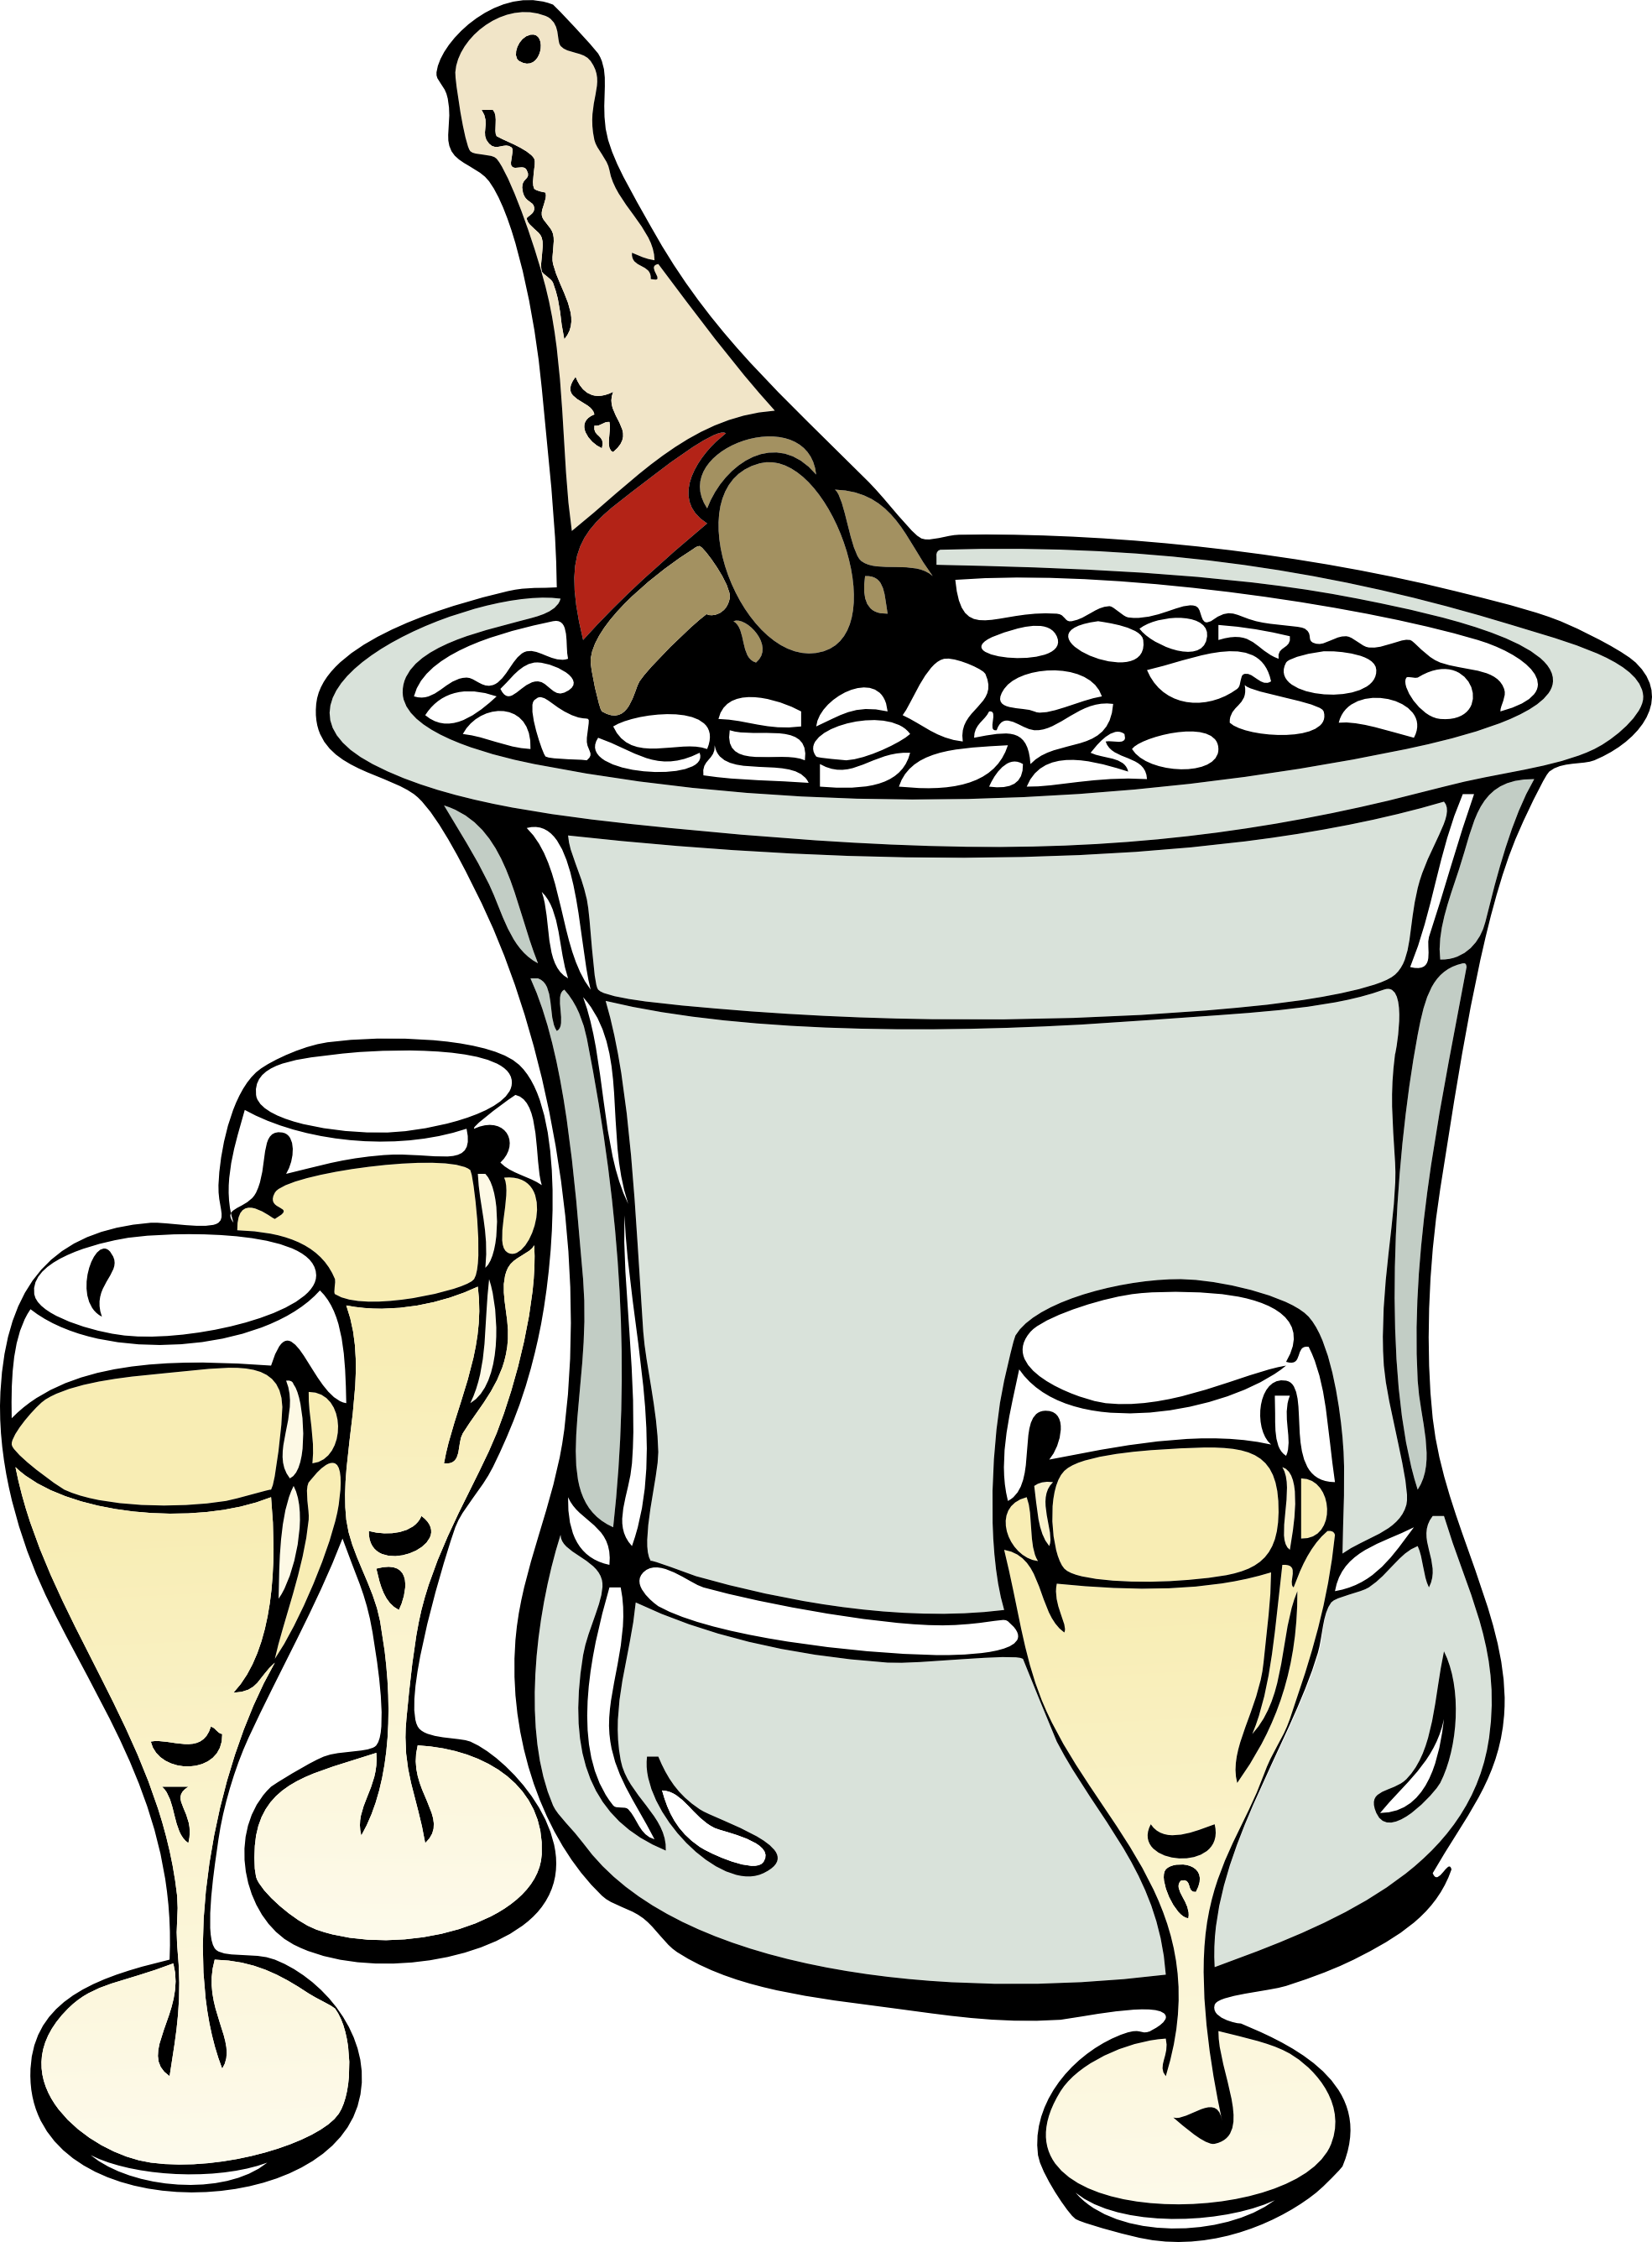 Pop clipart champagne cork. Panda free images champagneclipart